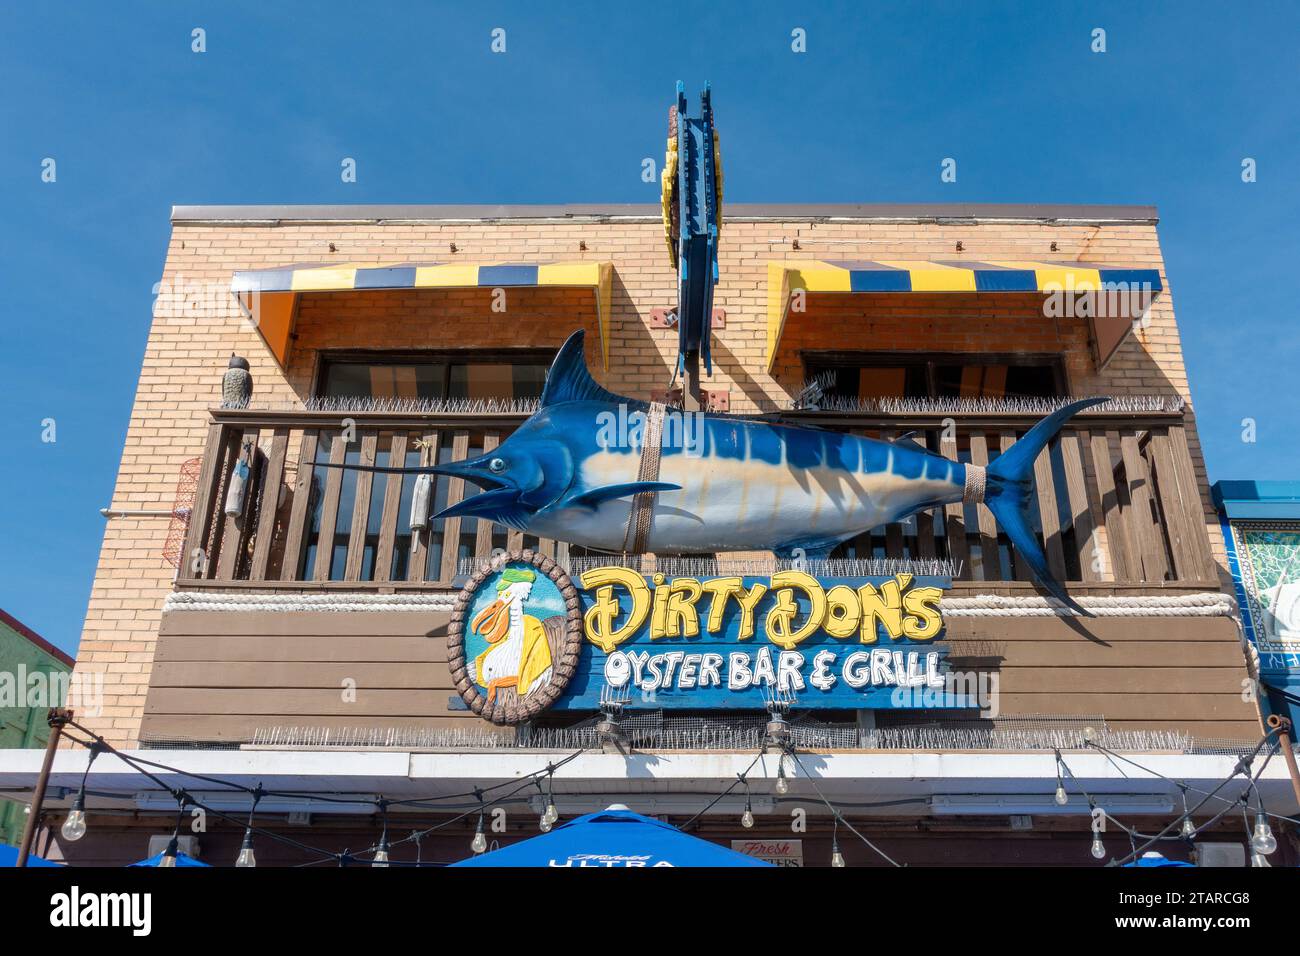 Dirty Don's Oyster Bar And Grill Restaurant Myrtle Beach South Carolina United States, Sailfish Logo Sign Building Exterior Stock Photo